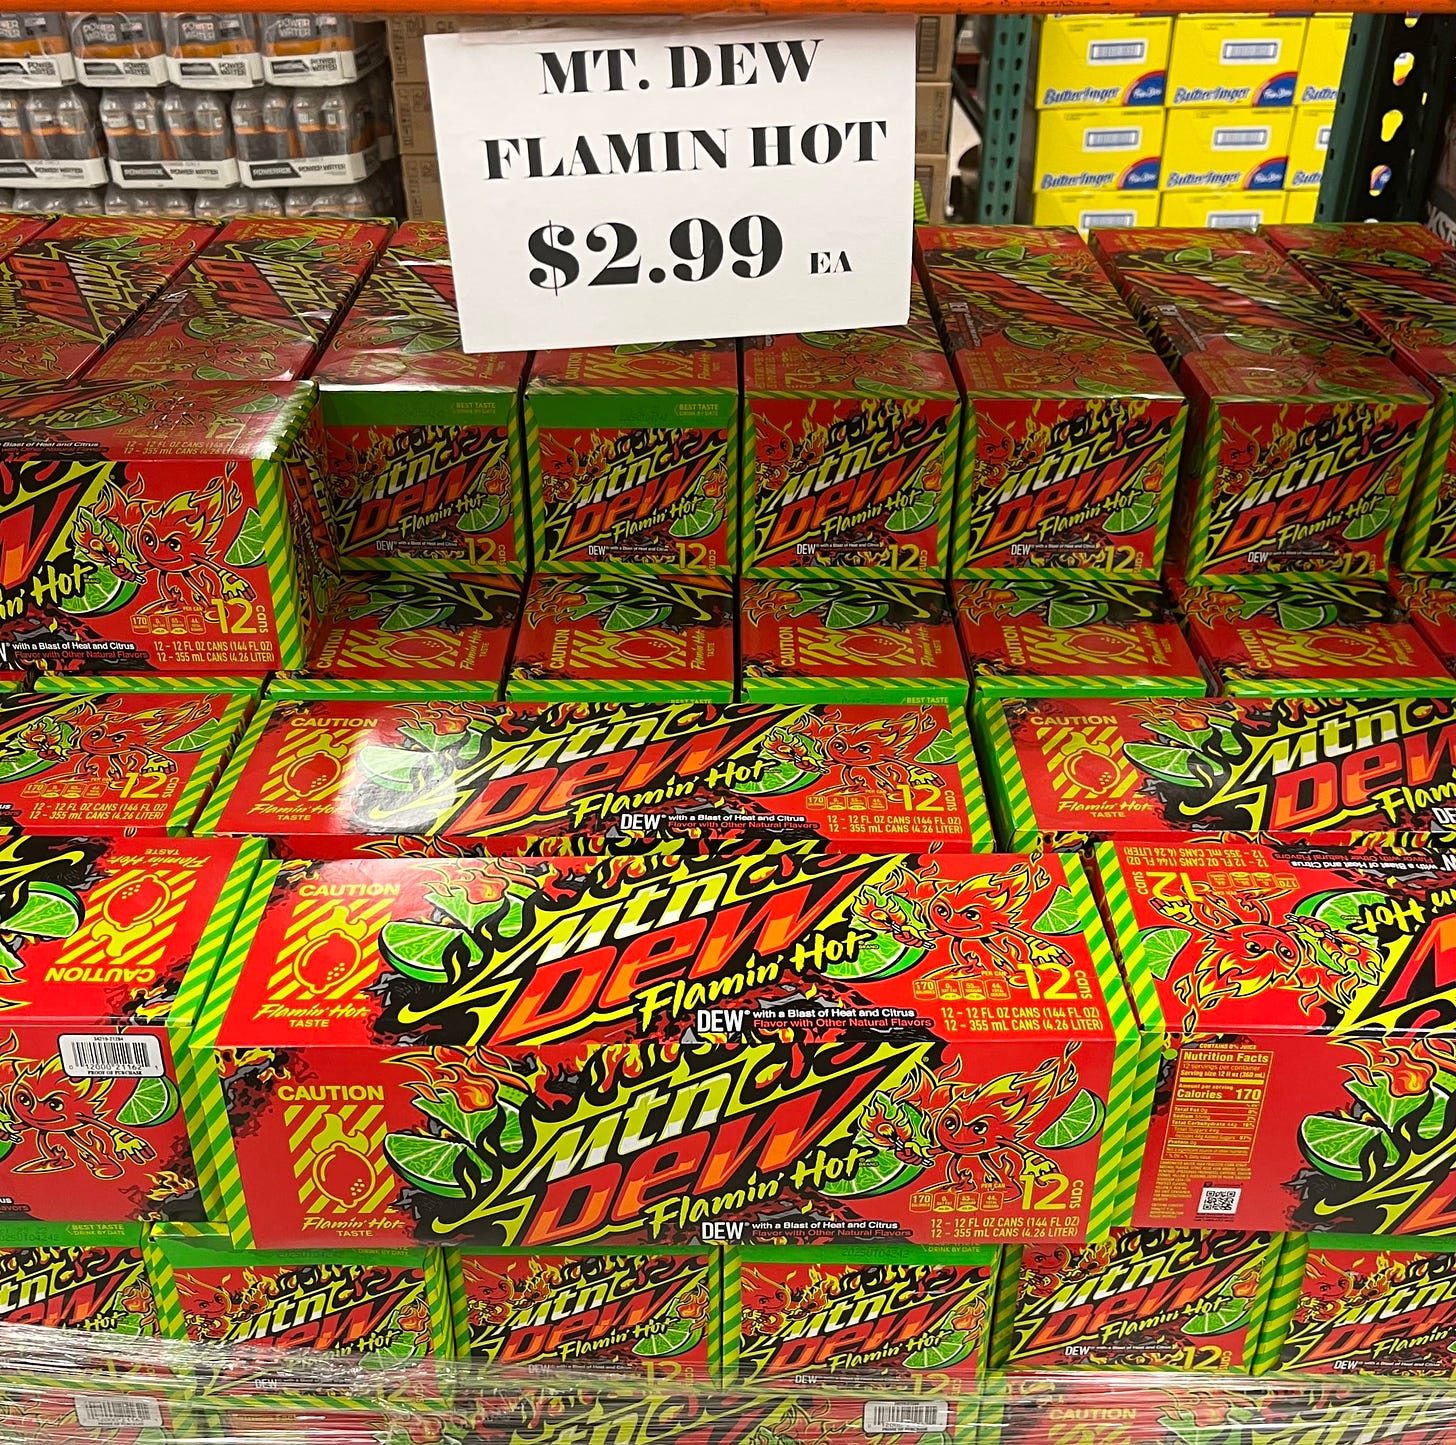 bright green and orange twelve packs of mountain dew flamin hot, stacked ten across and eight high, with a sign up top reading mt. dew flamin hot $2.99 each